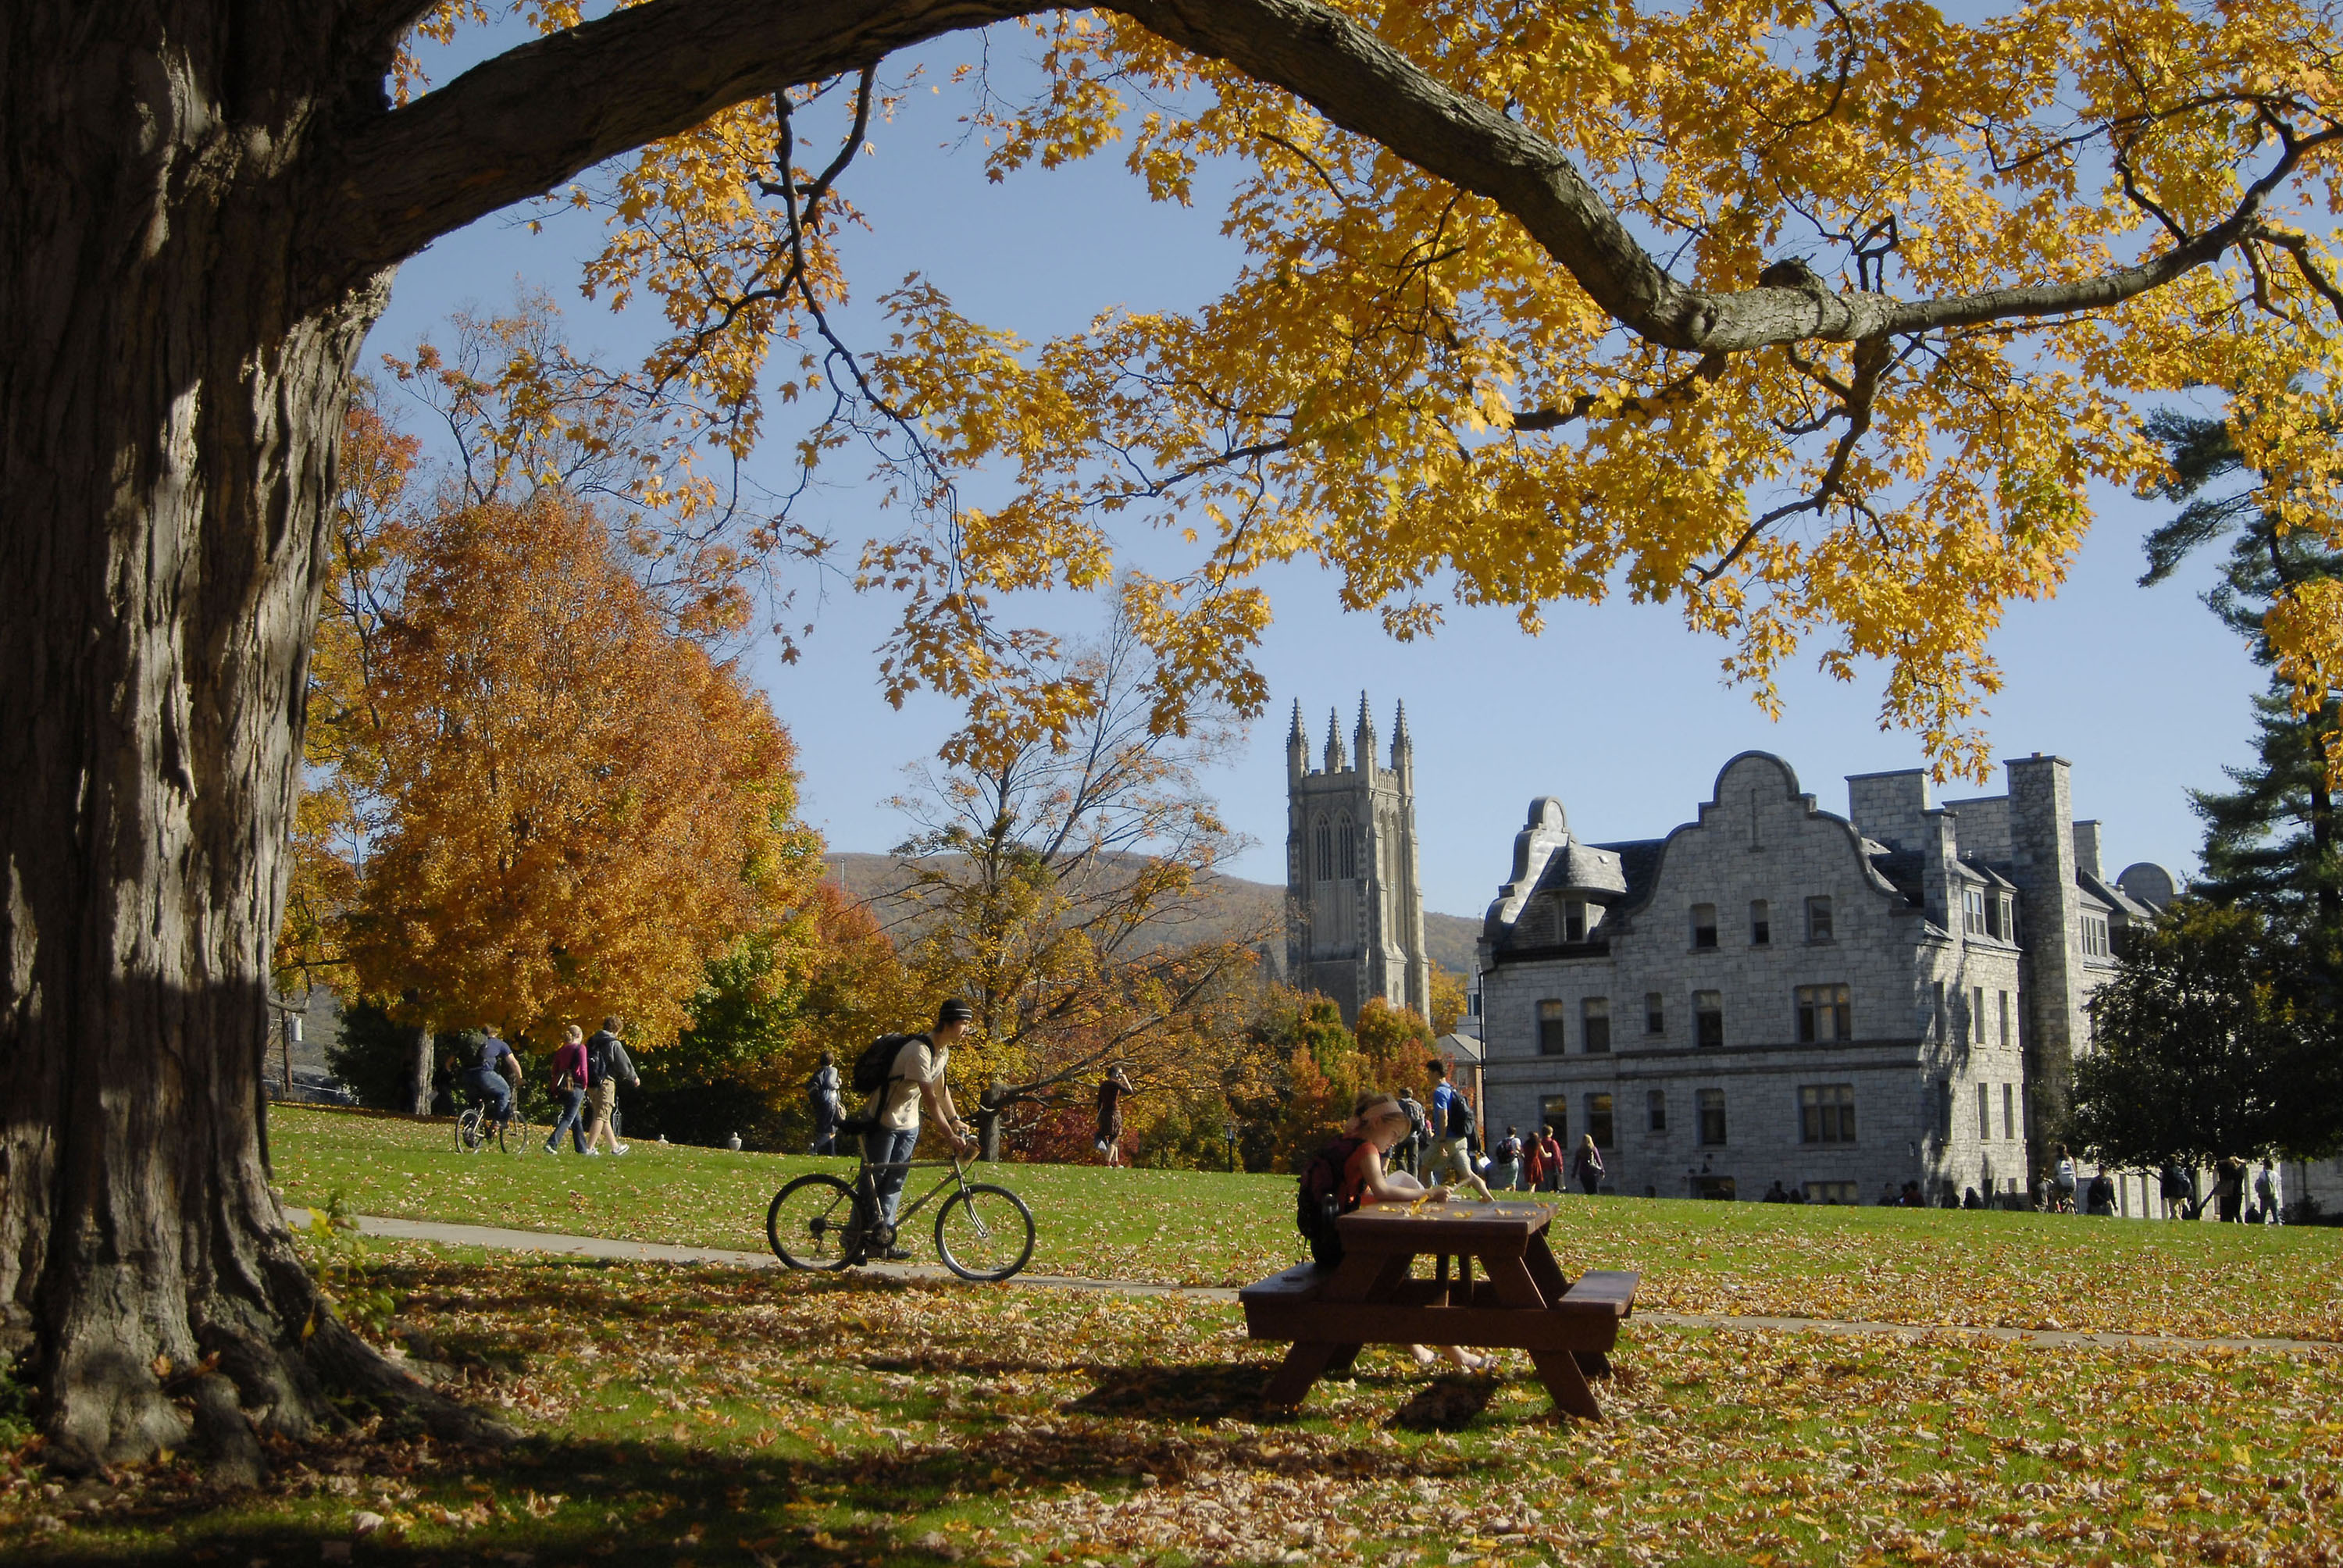 Students pass time between classes on the campus of Williams College in Williamstown, Mass., on October 22, 2007. (Nancy Palmieri—Bloomberg/Getty Images)